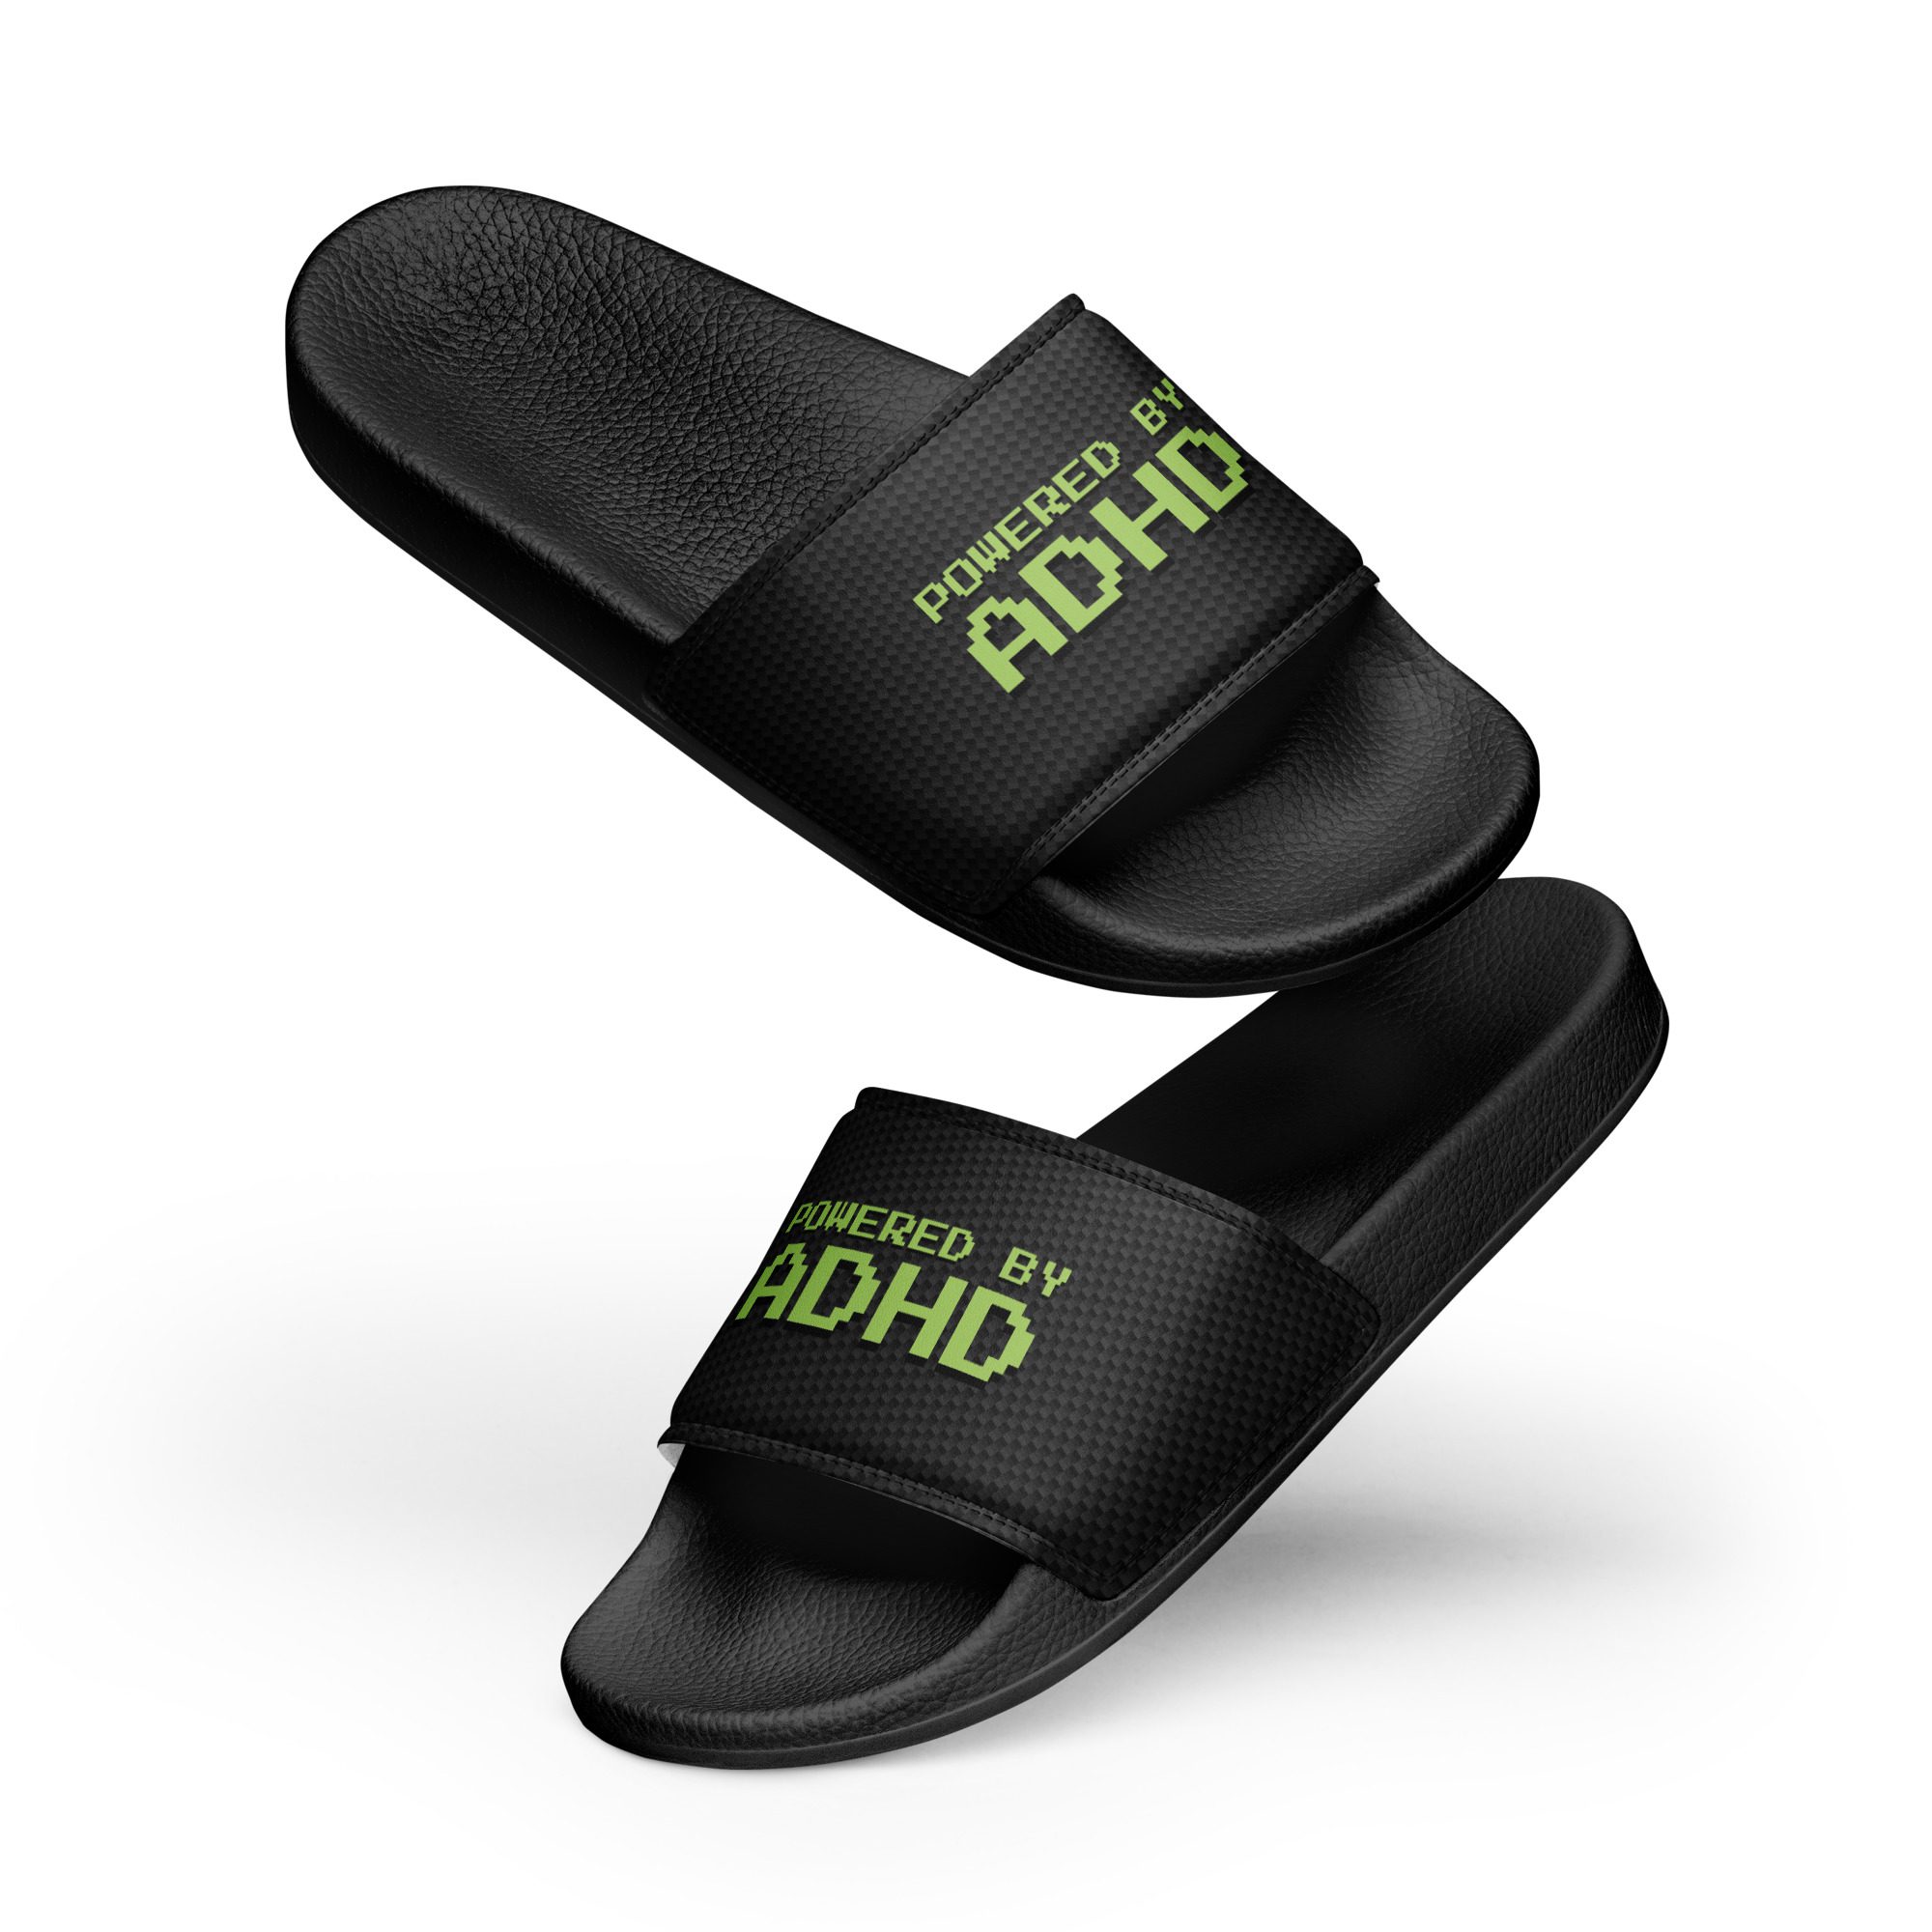 Powered By ADHD Women's Slides